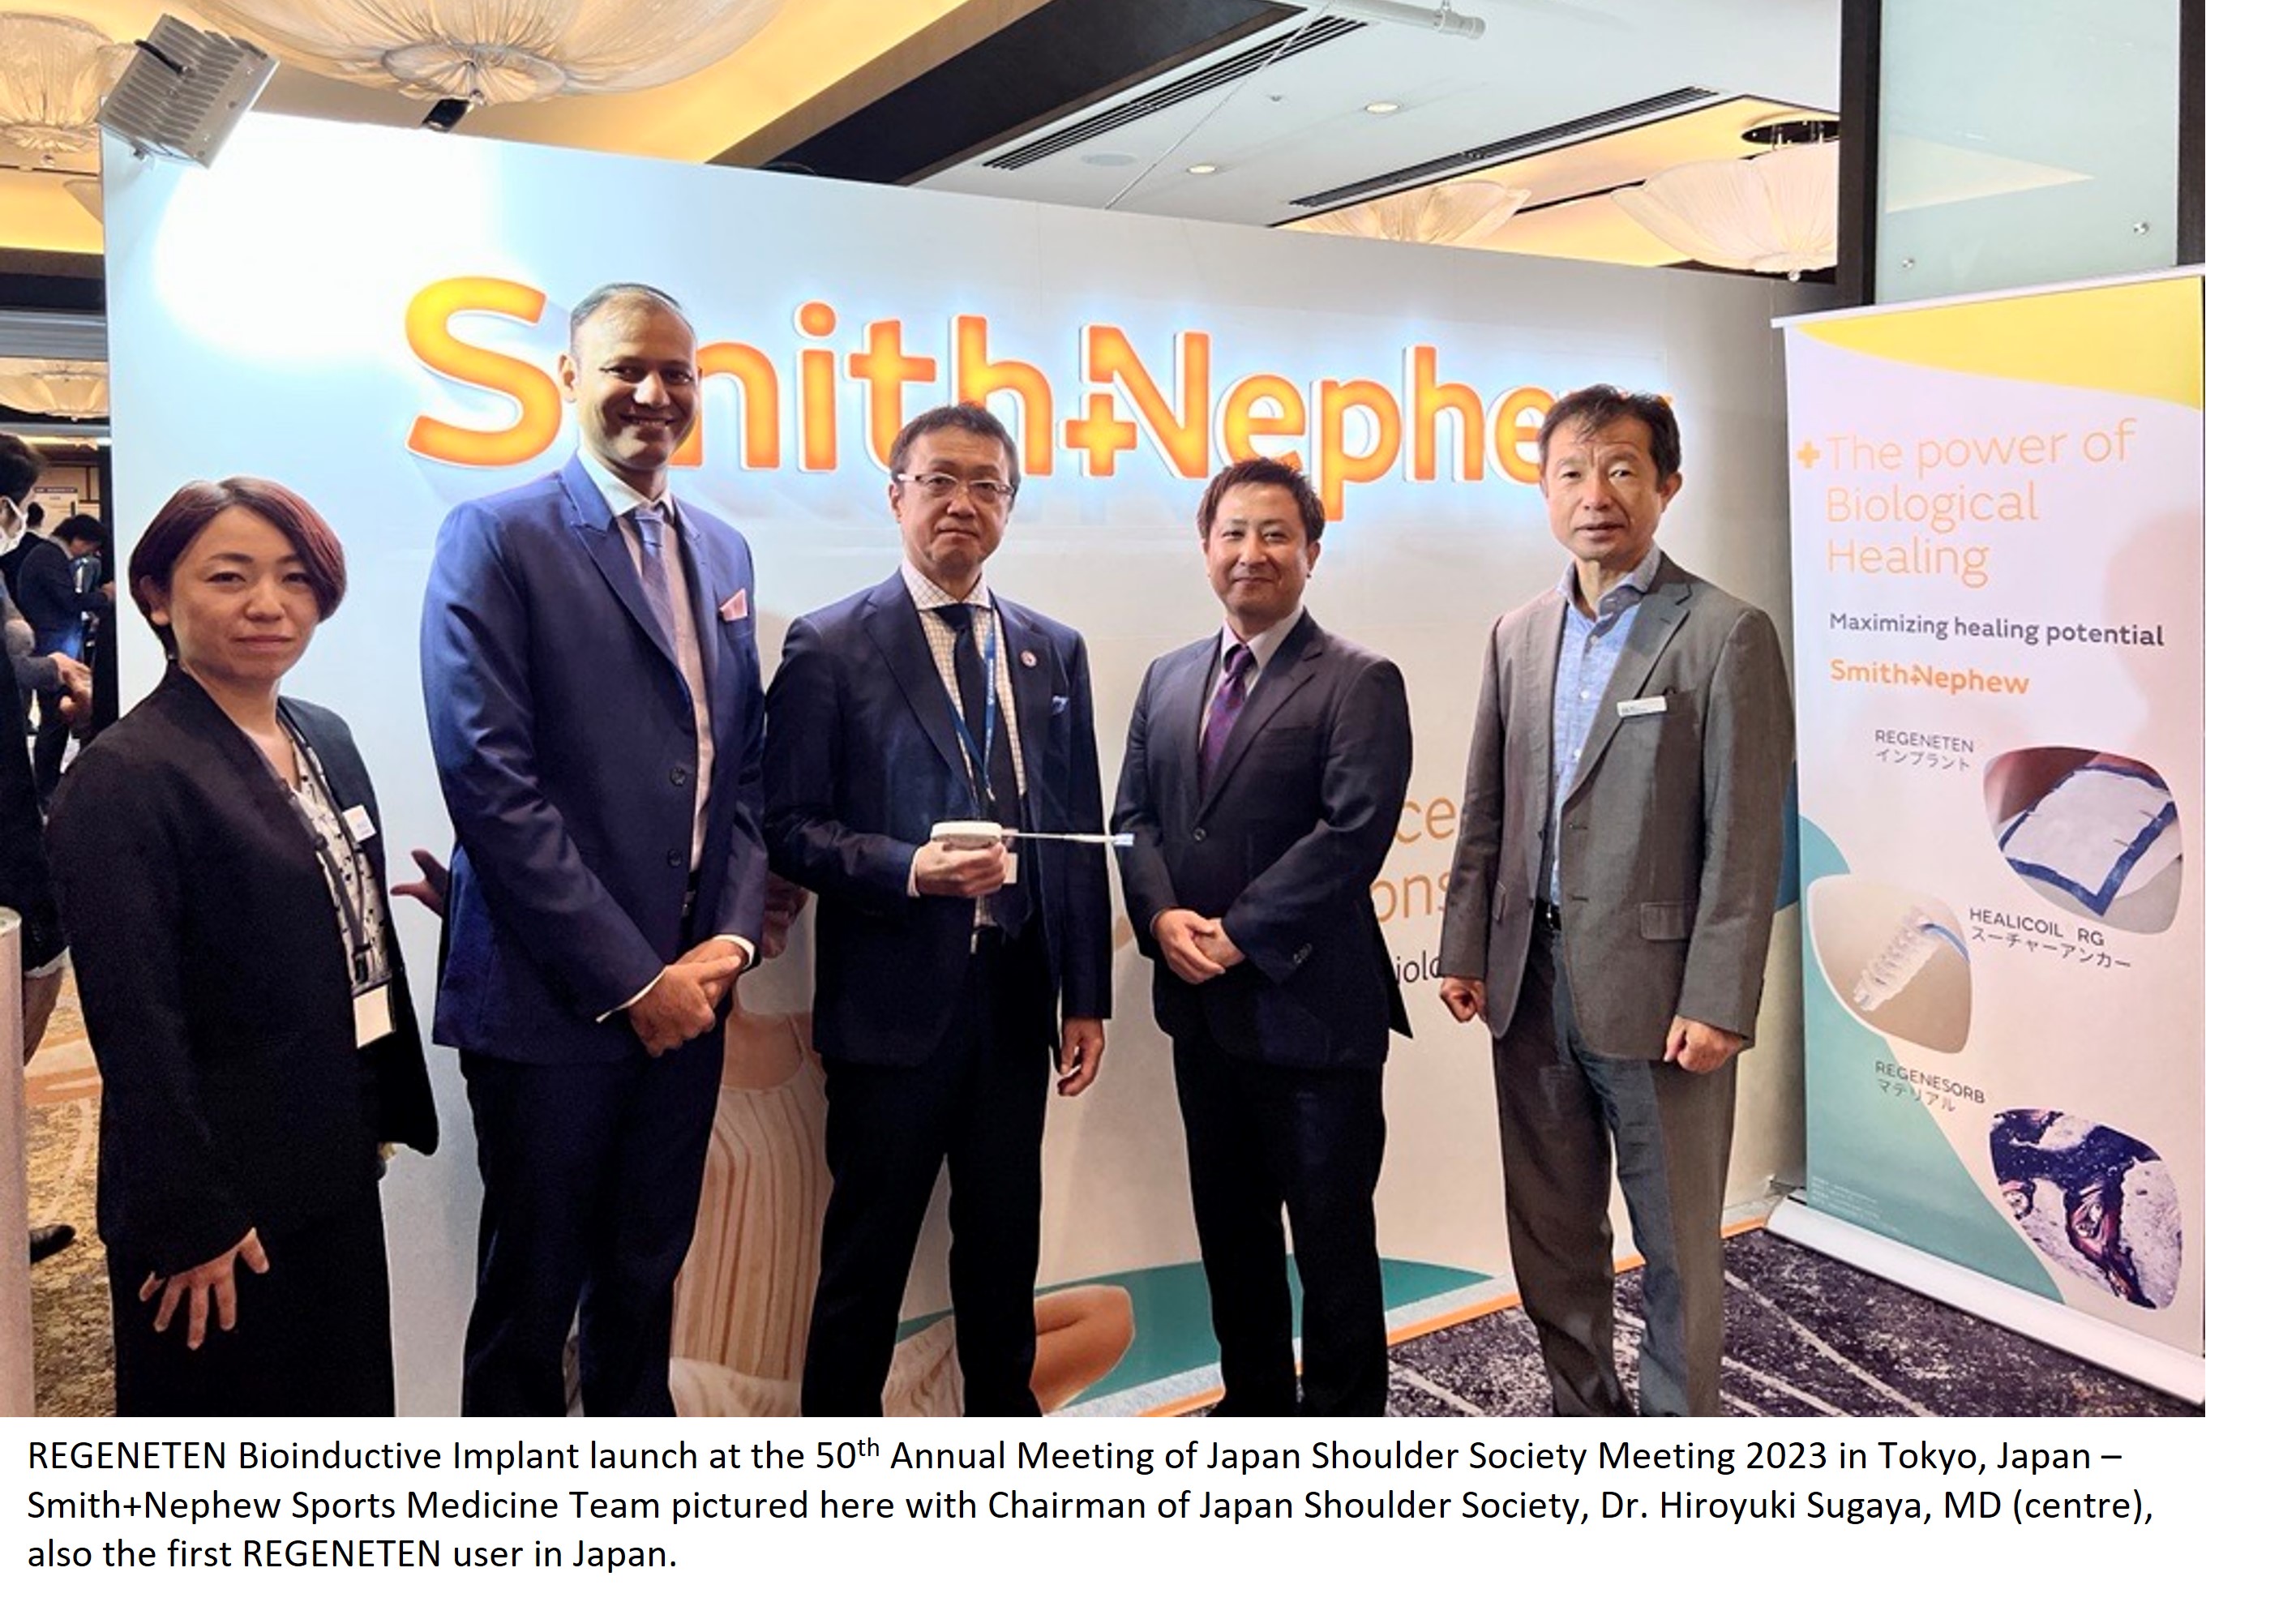 REGENETEN Bioinductive Implant launch at the 50th Annual Meeting of Japan Shoulder Society Meeting 2023 in Tokyo, Japan - Smith+Nephew Sports Medicine Team pictured here with Chairman of Japan Shoulder Society, Dr. Hiroyuki Sugaya, MD (centre), also the first REGENETEN user in Japan